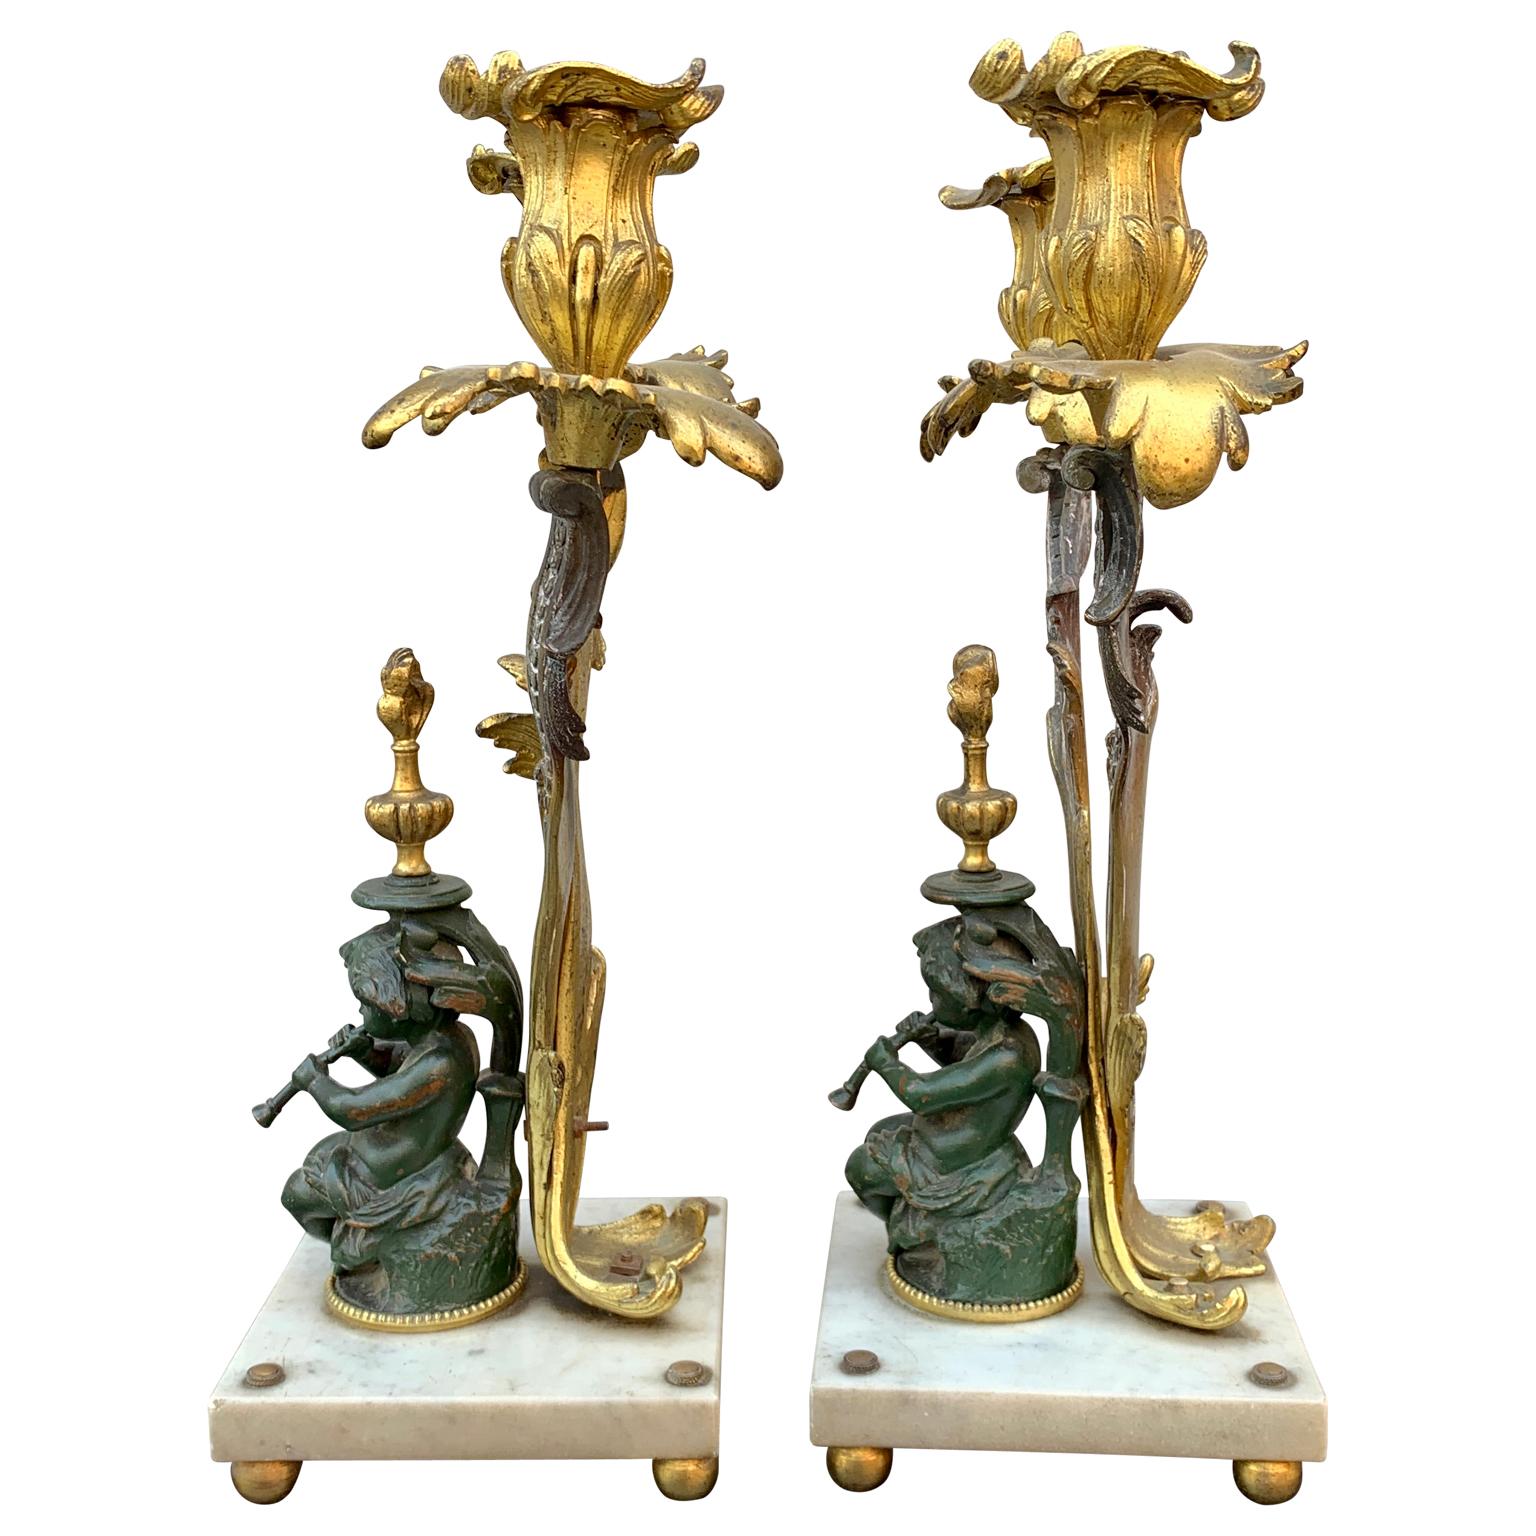 Cast Pair of Napoleon III French Bronze Candelabra on Marble Base